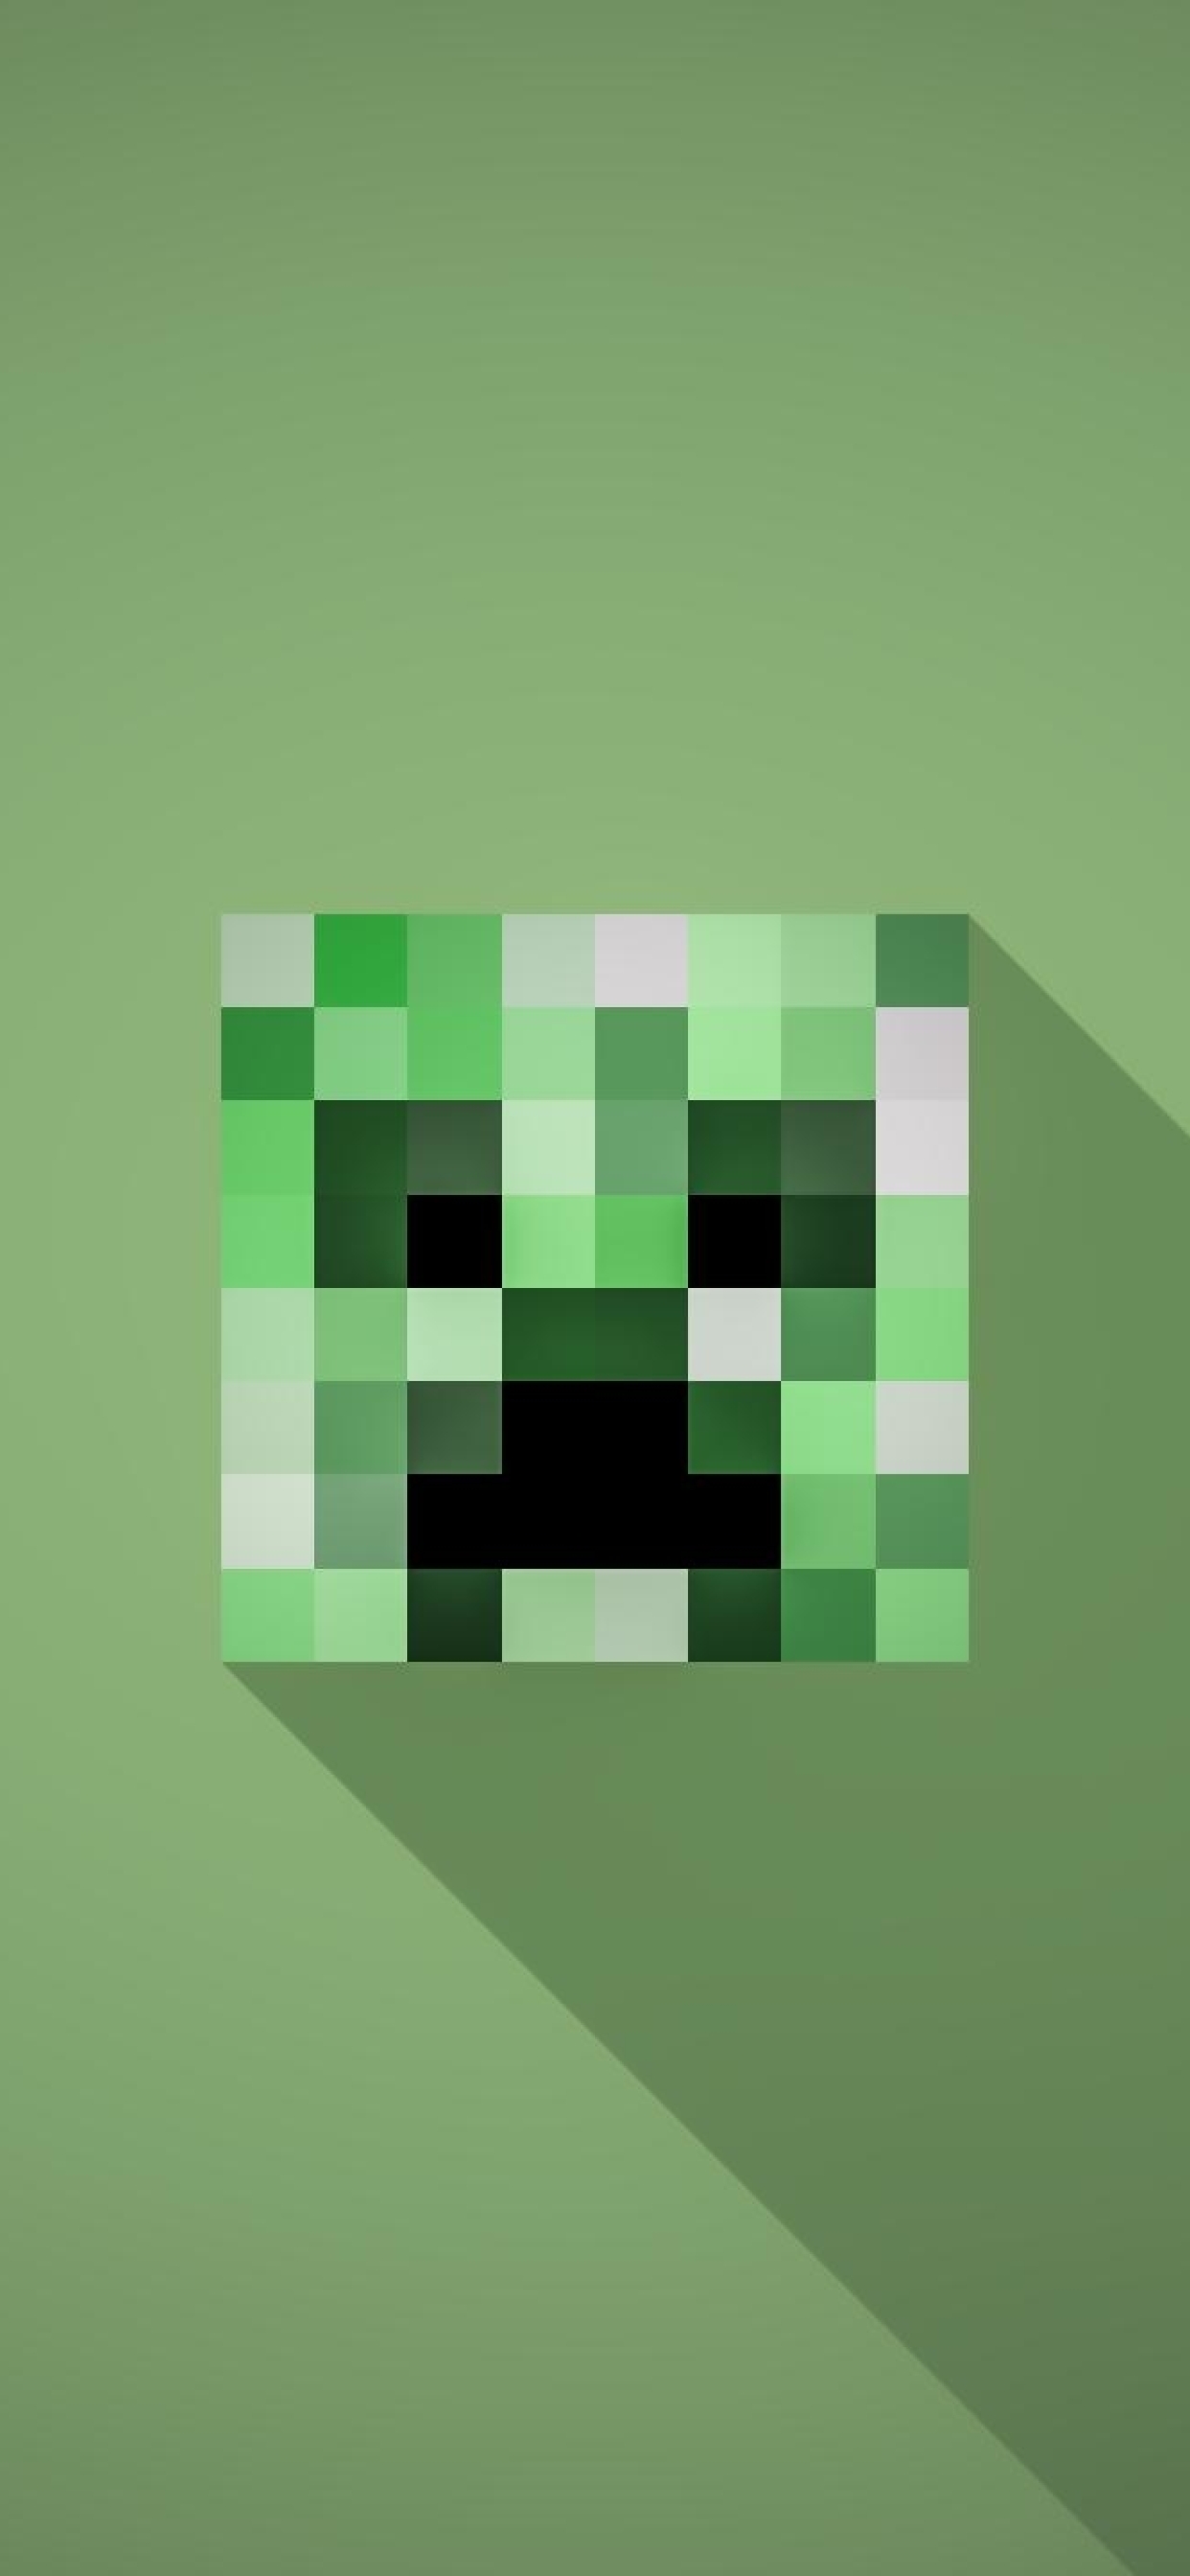 1242x26 Minecraft Minimalist Creeper Iphone Xs Max Wallpaper Hd Minimalist 4k Wallpapers Images Photos And Background